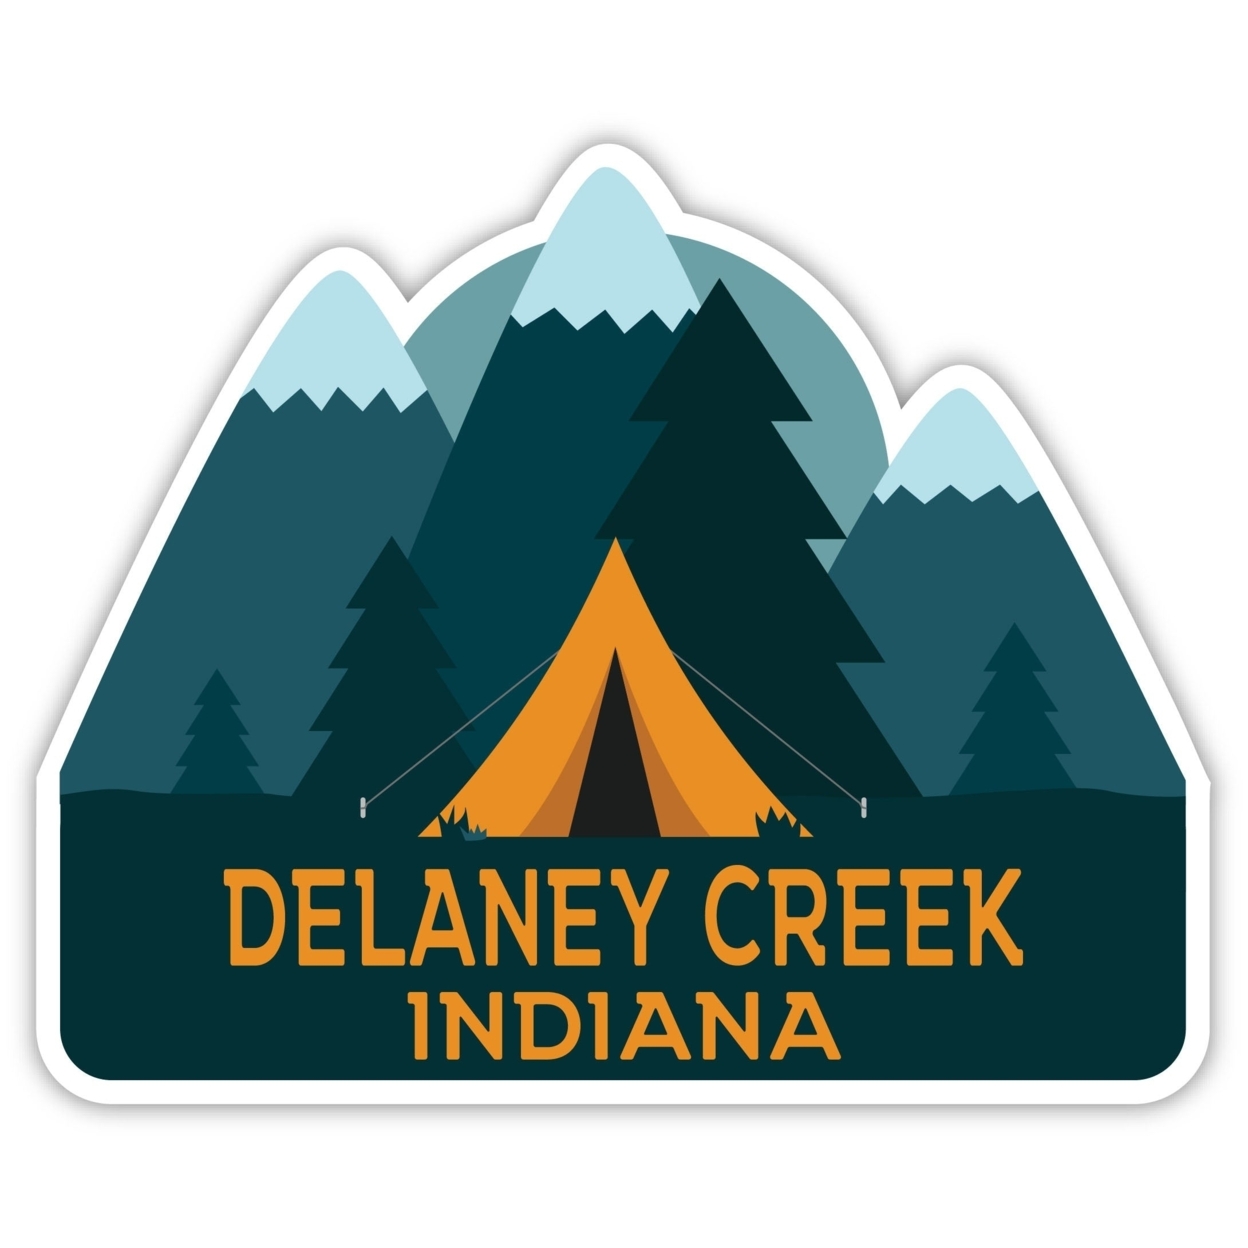 Delaney Creek Indiana Souvenir Decorative Stickers (Choose Theme And Size) - 4-Pack, 8-Inch, Tent